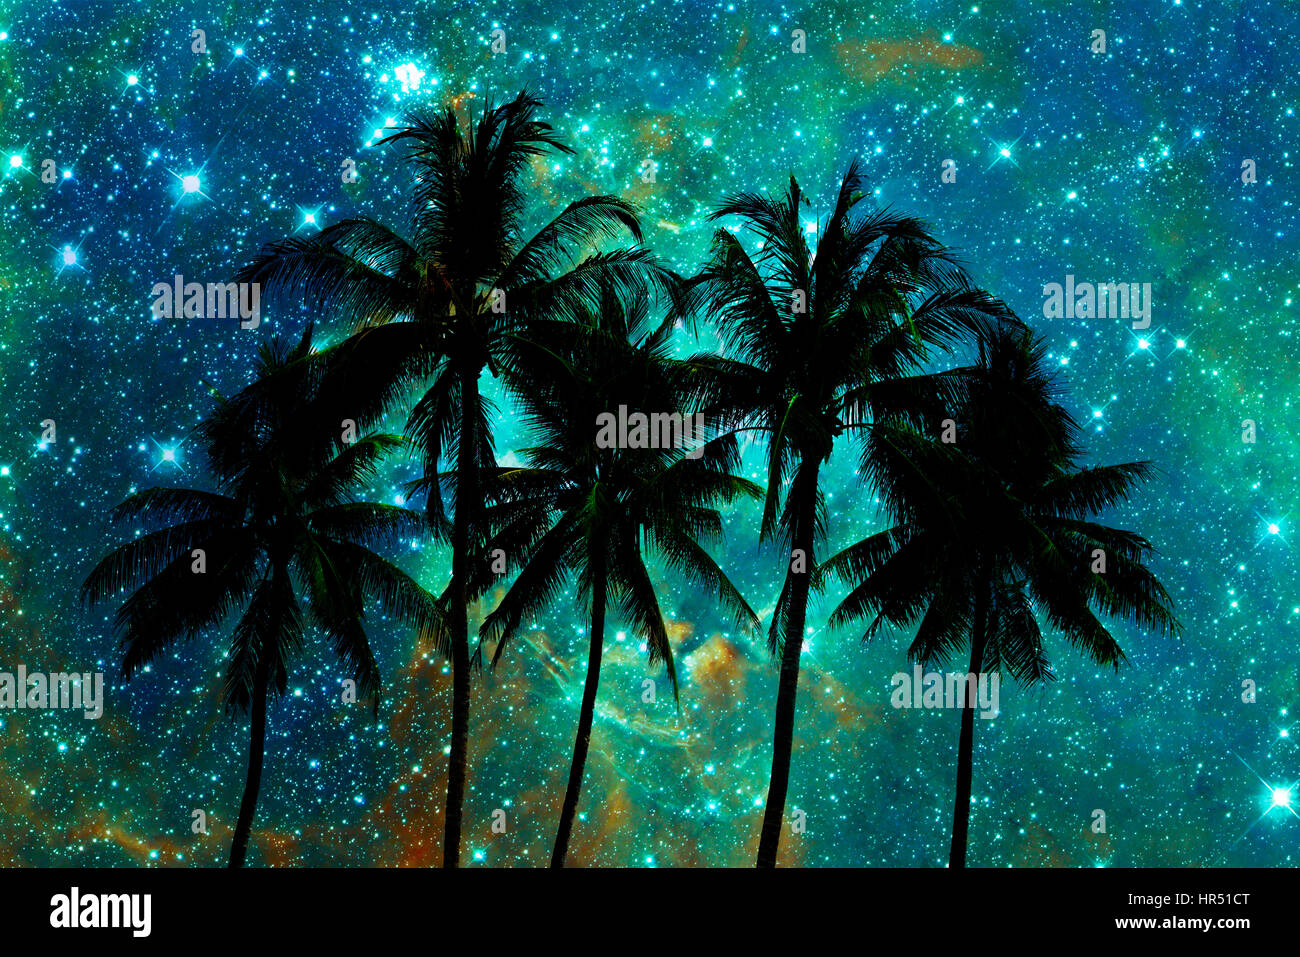 Palm trees silhouettes, starry night background Stock Photo